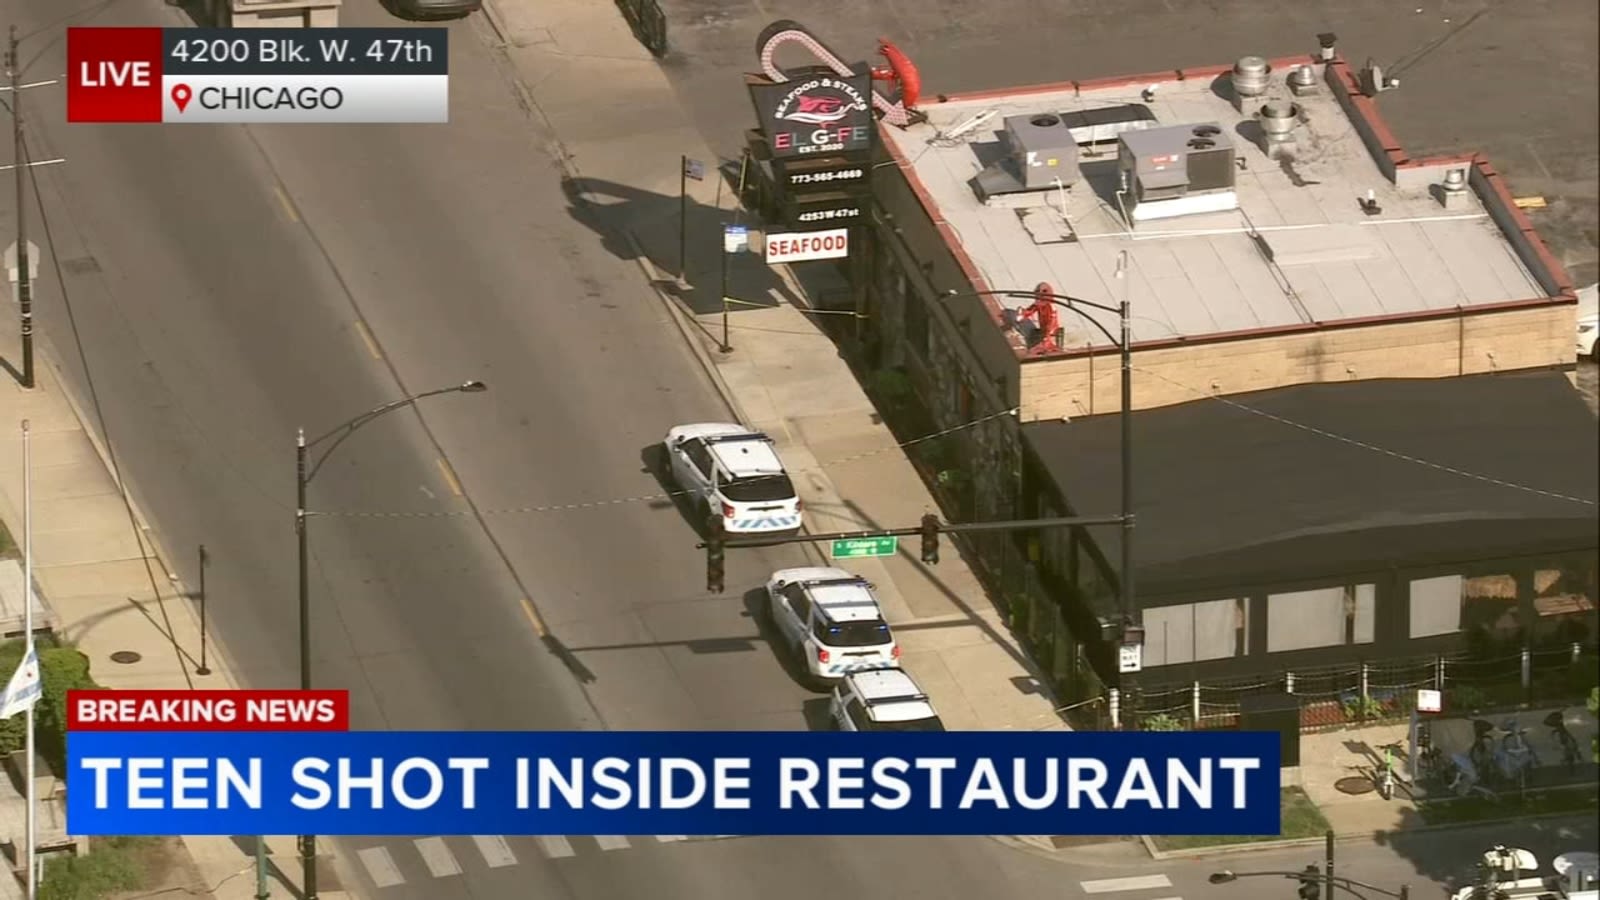 Chicago shooting: 15-year-old boy shot inside Archer Heights restaurant, police say